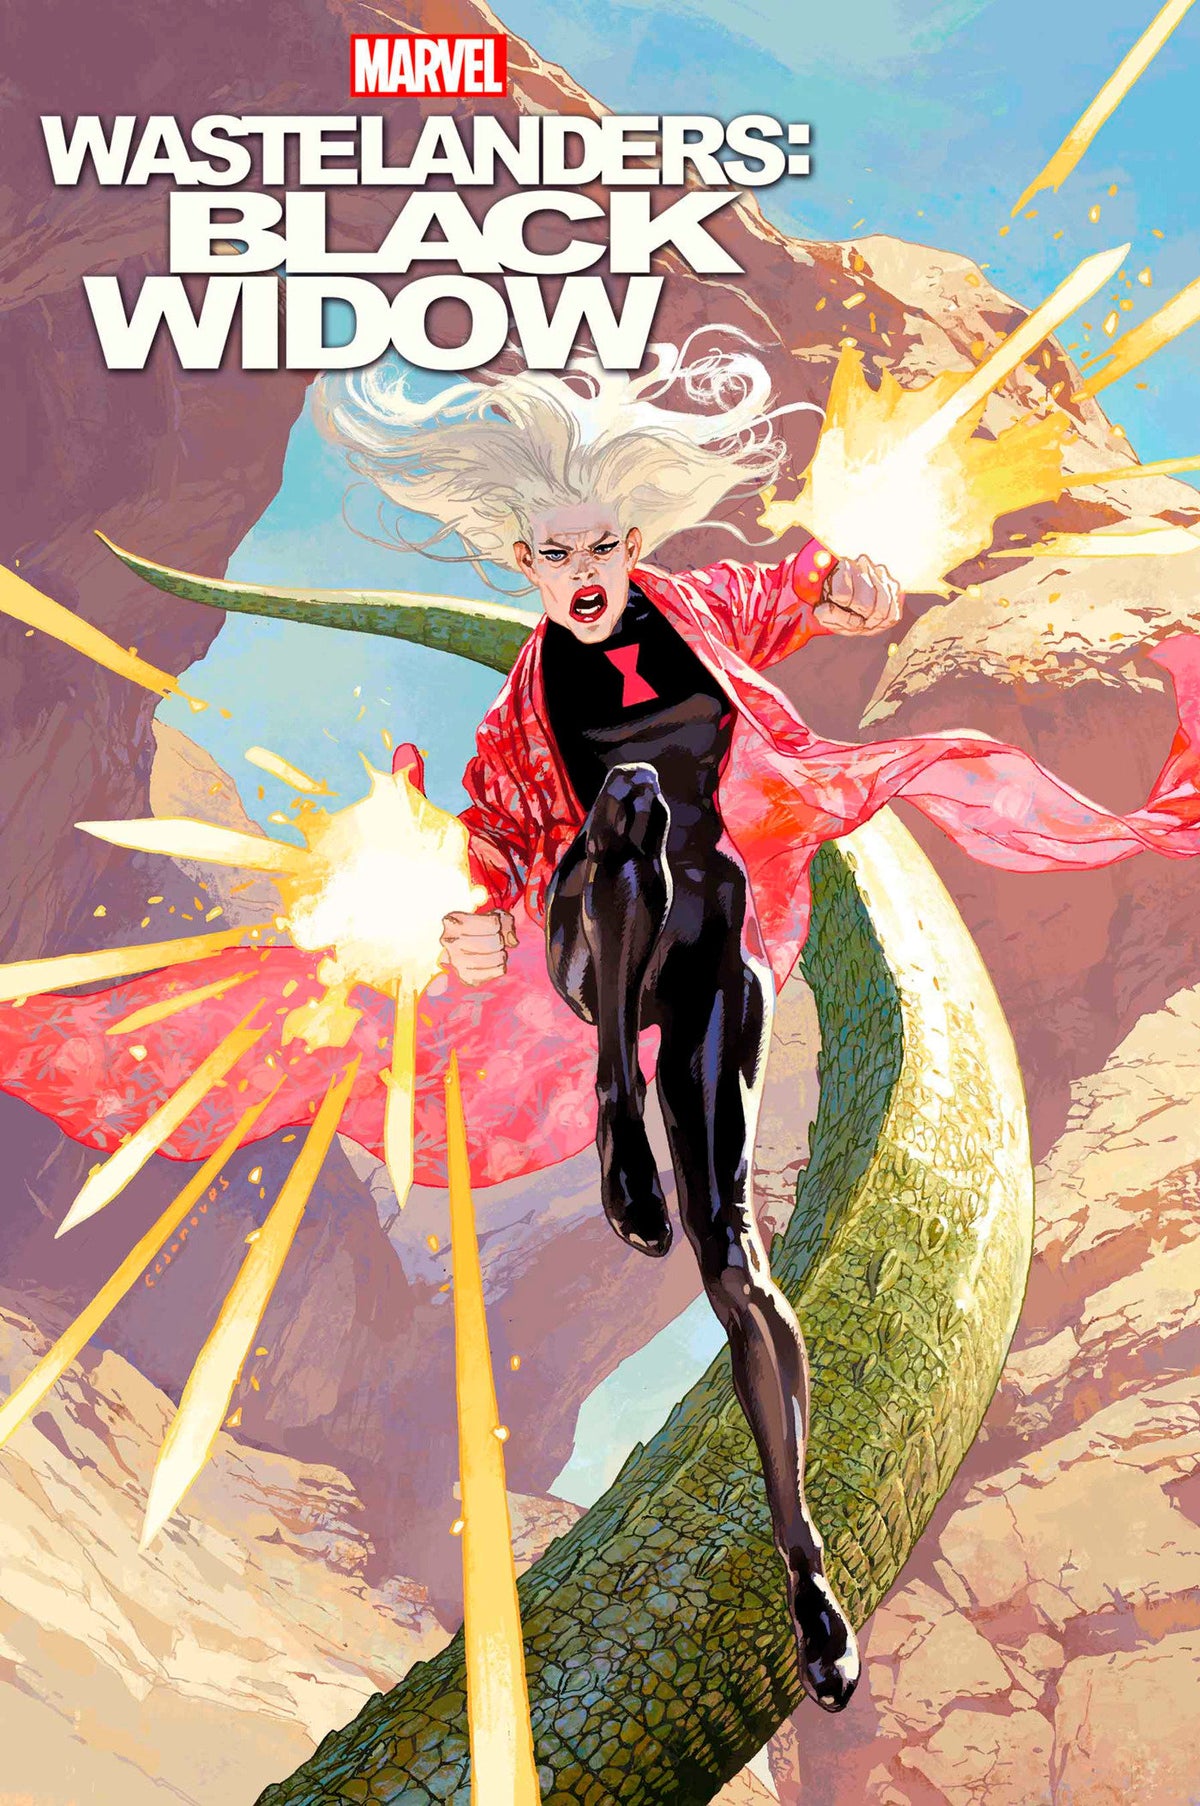 Image of Wastelanders: Black Widow 1 comic sold by Stronghold Collectibles.